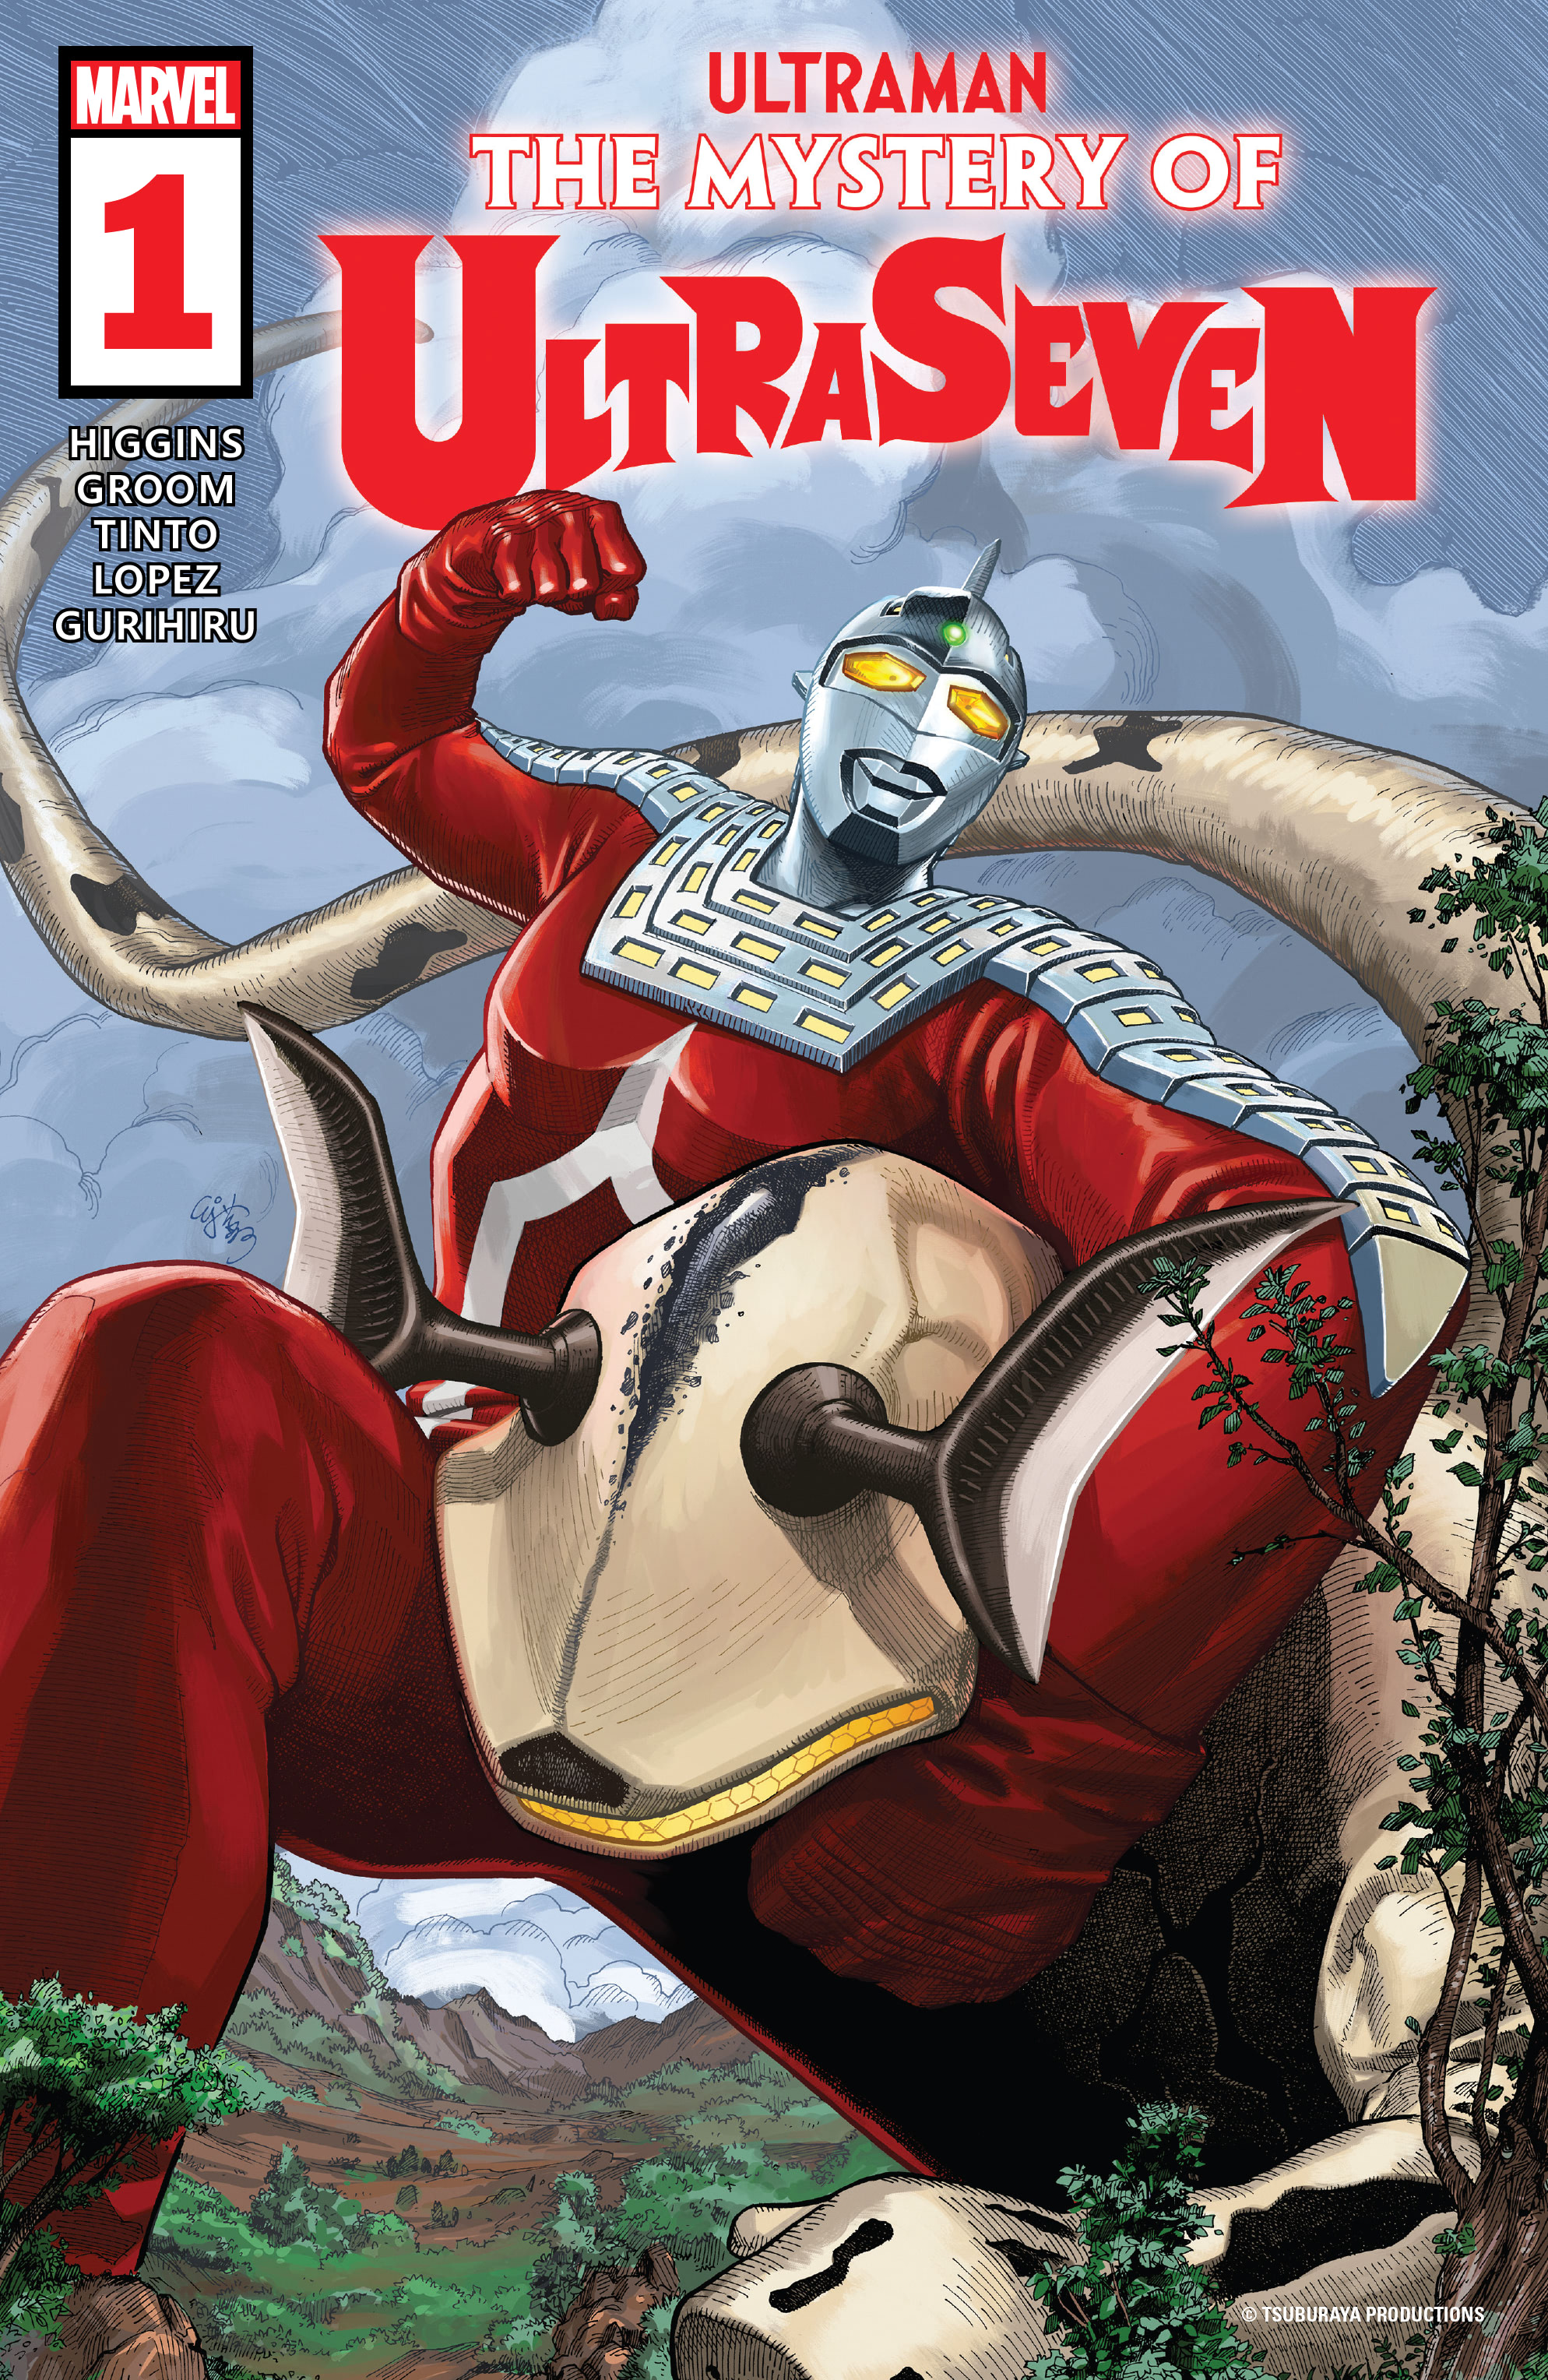 Read online Ultraman: The Mystery of Ultraseven comic -  Issue #1 - 1